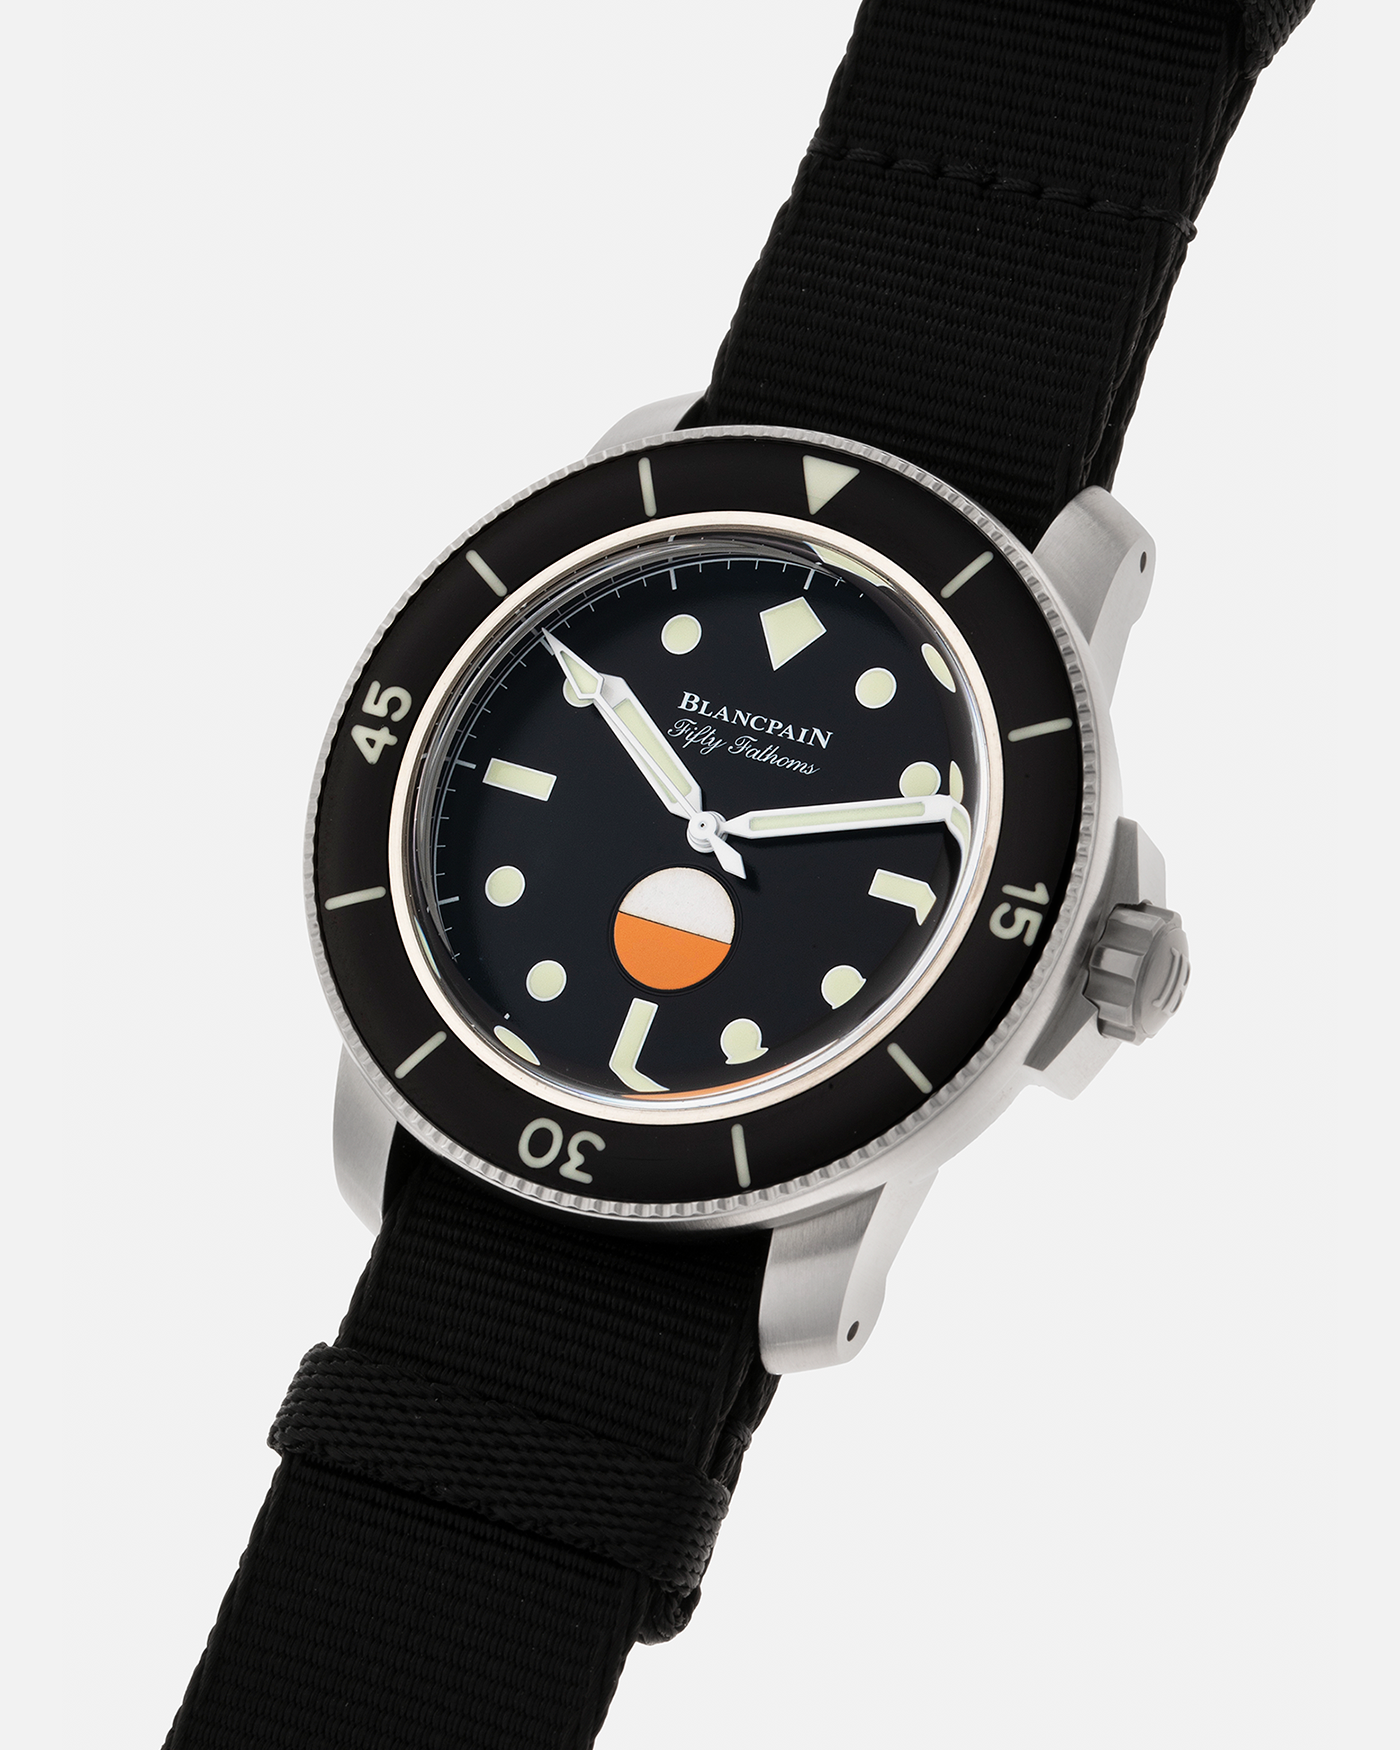 Brand: Blancpain Year: 2020 Model: Fifty Fathoms Mil Spec Hodinkee Edition Reference Number: 5008 11B30 NABA Material: Stainless Steel Movement: Automatic Blancpain 1154 Case Diameter: 40mm Bracelet/Strap: Blancpain Black NATO Strap